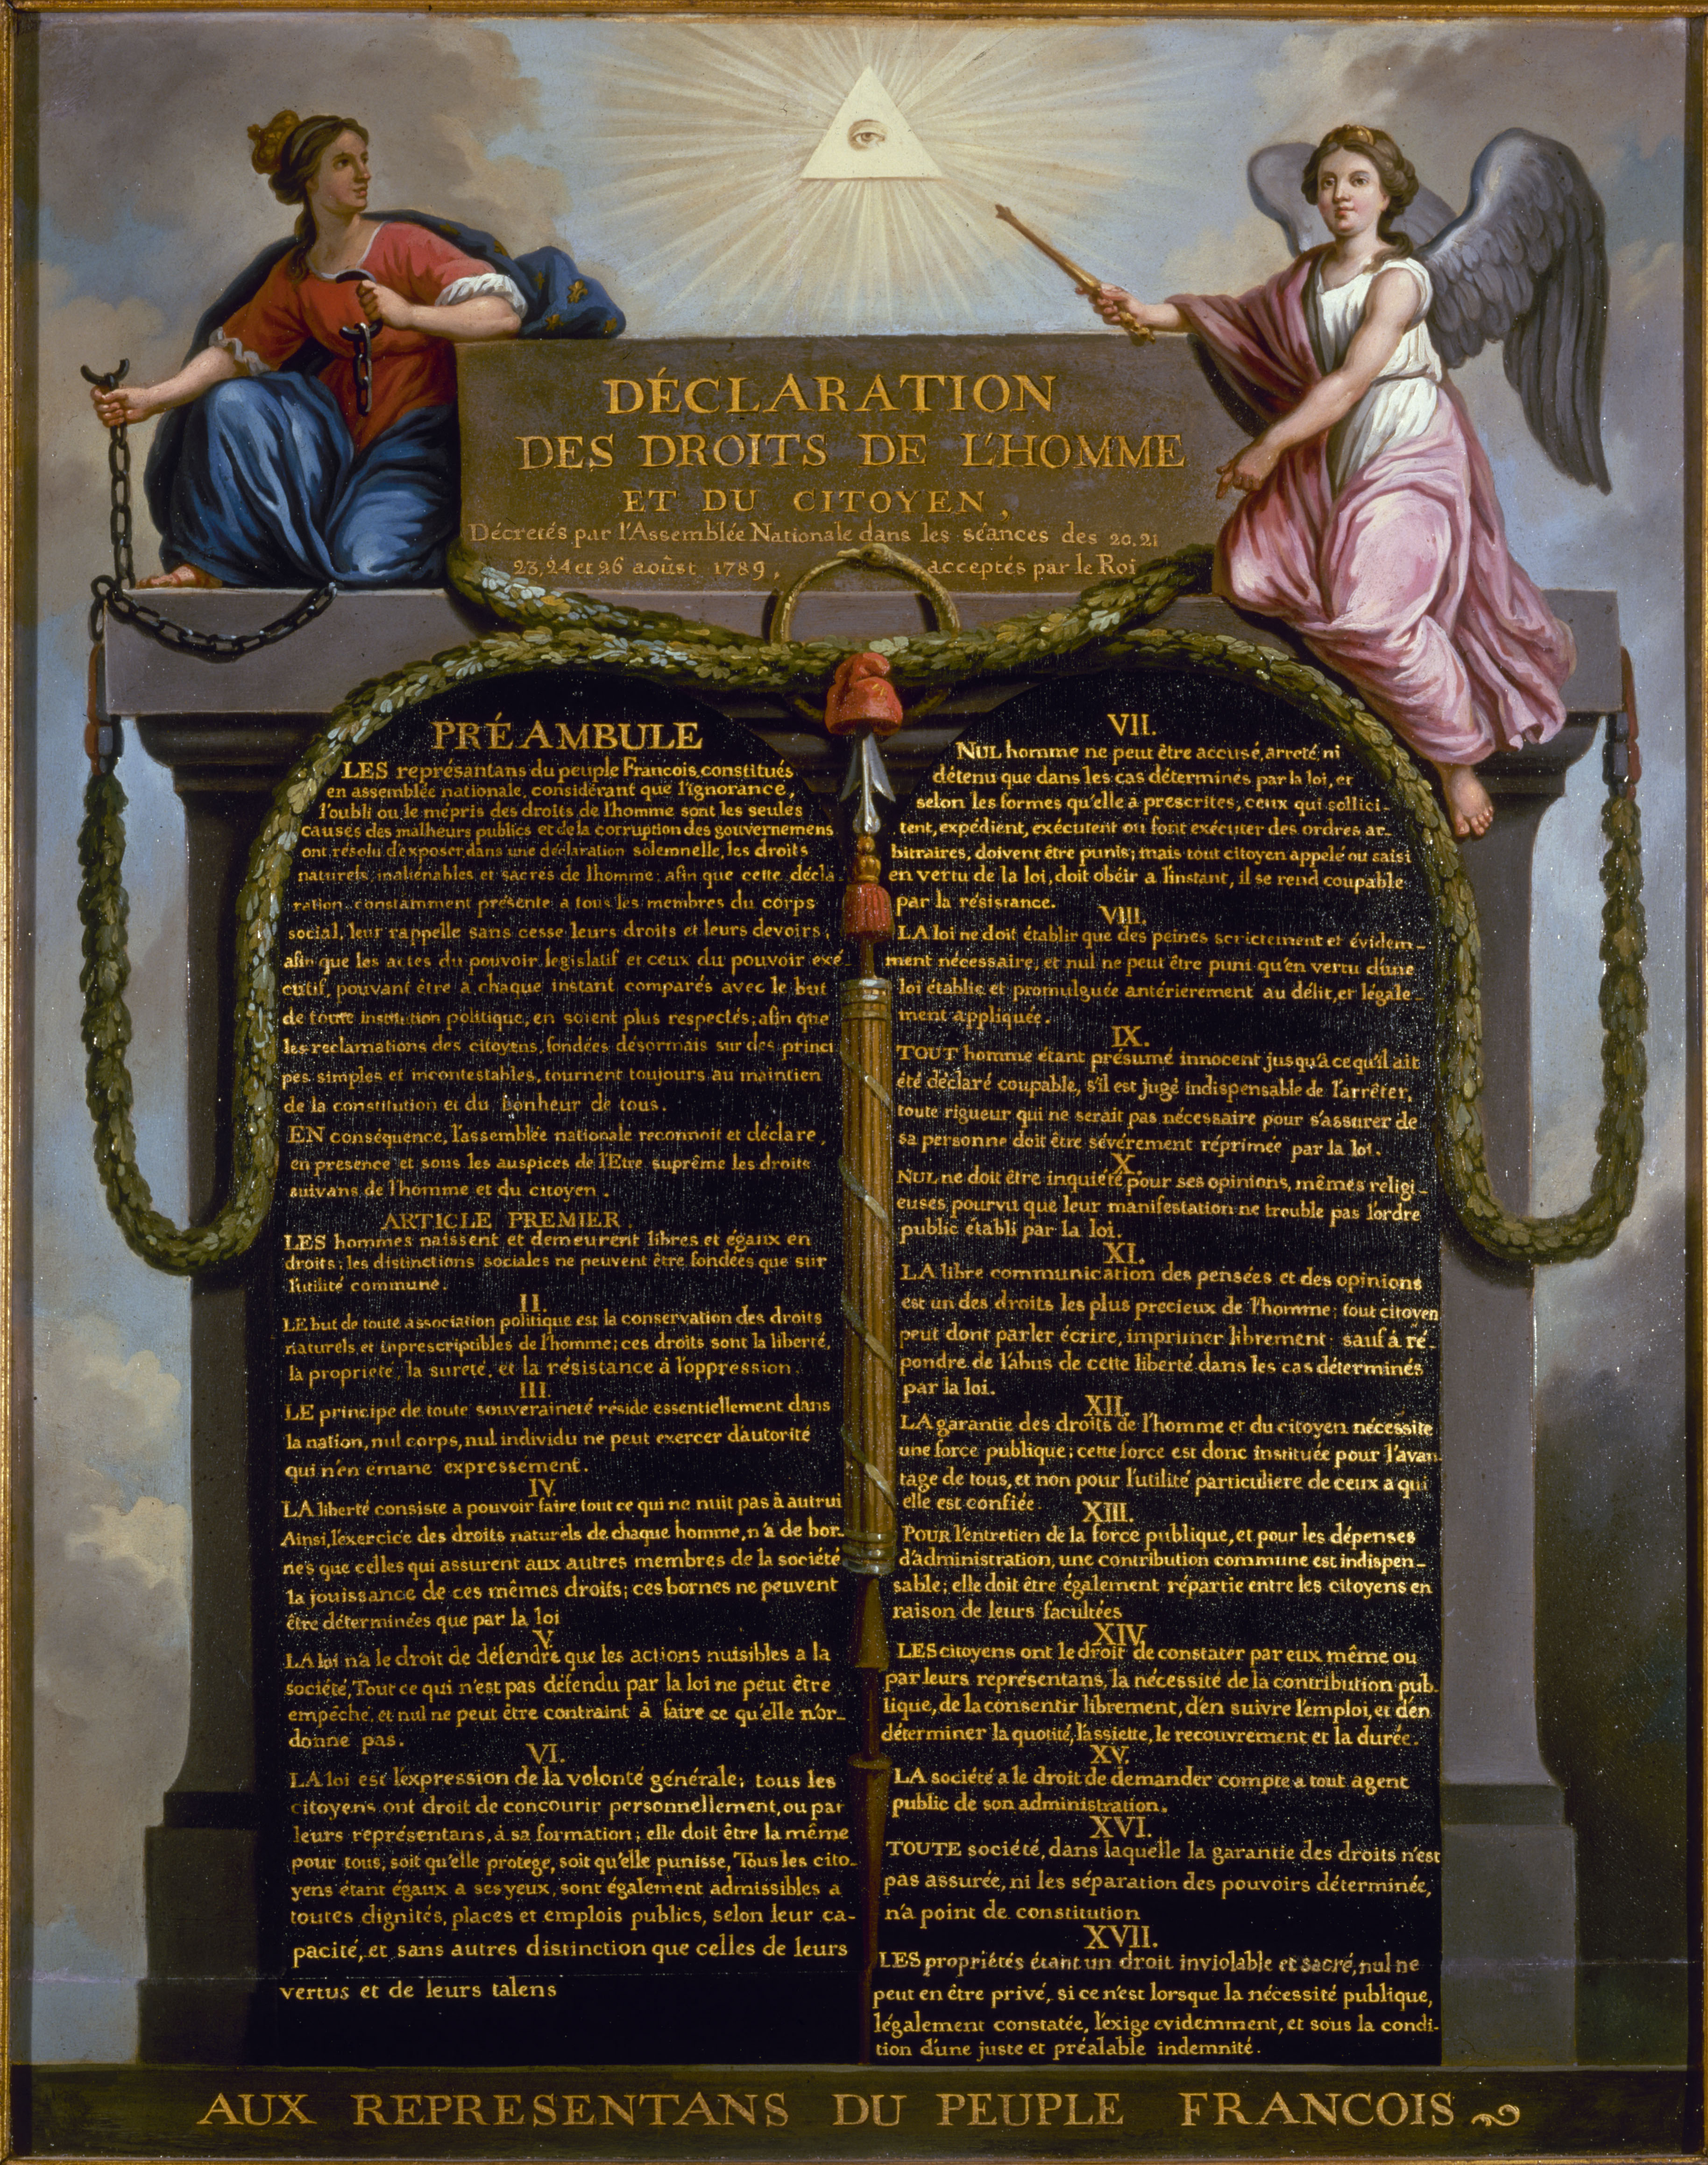 The Declaration of the Rights of Man and of the Citizen of 26 August 1789.